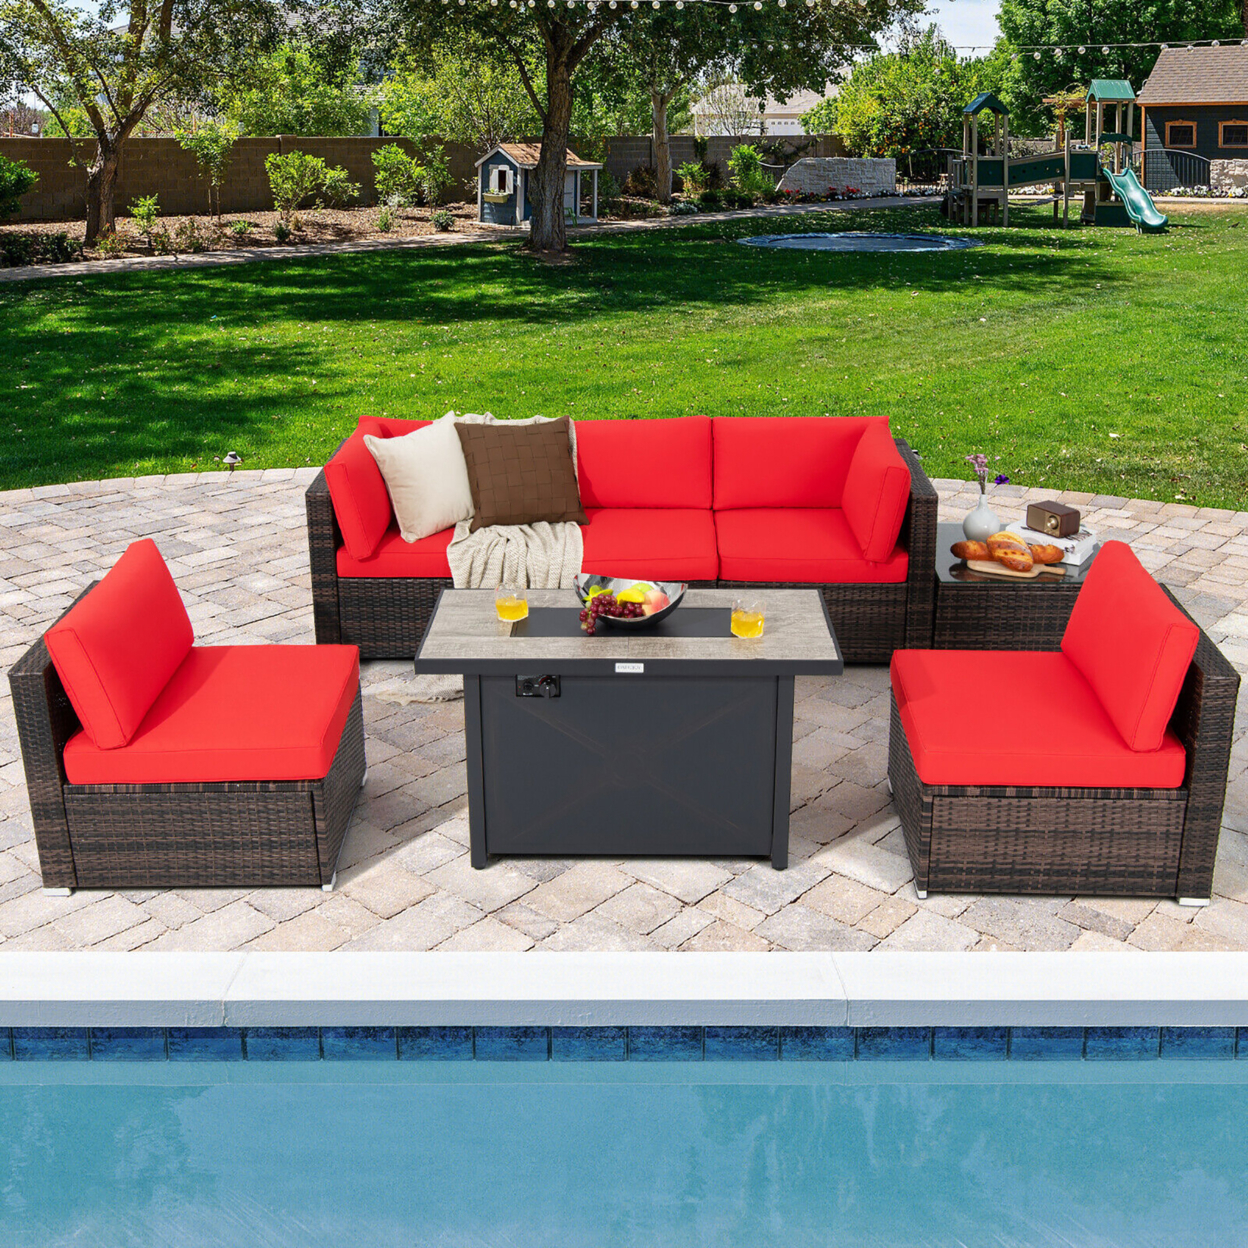 7PCS Patio Rattan Furniture Set Fire Pit Table Cover Cushion - Red